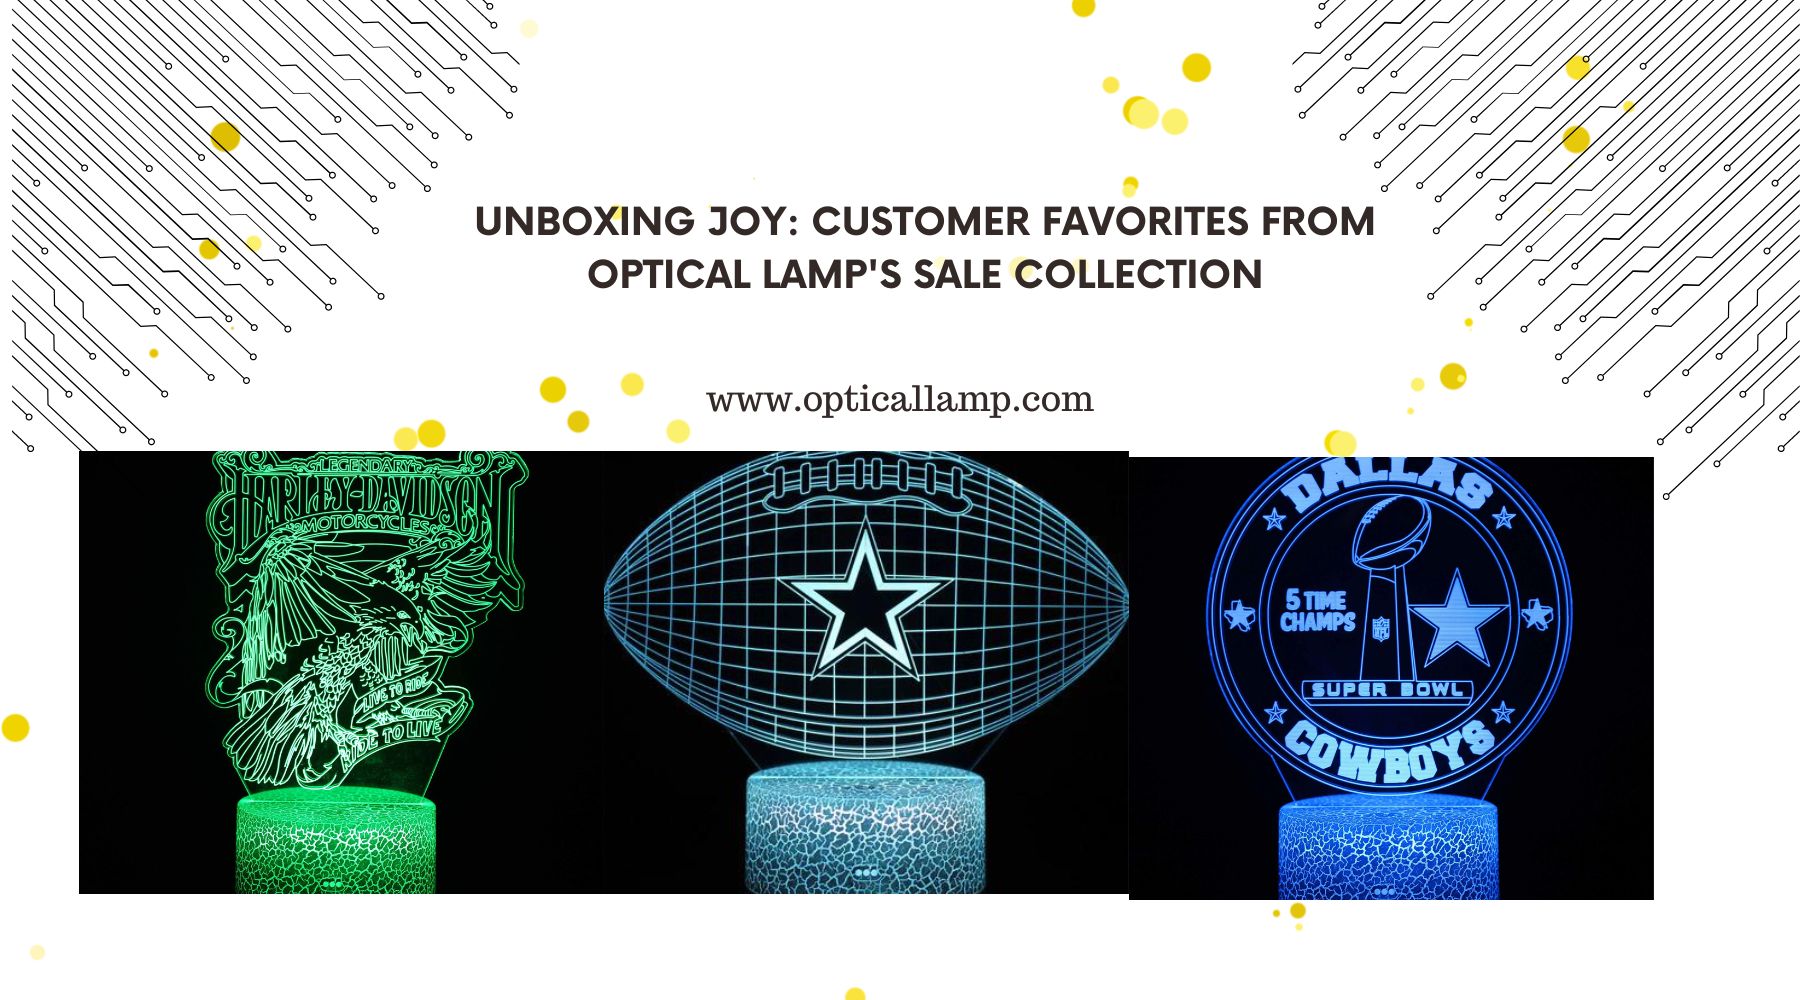 Unboxing Joy: Customer Favorites from Optical Lamp's Sale Collection